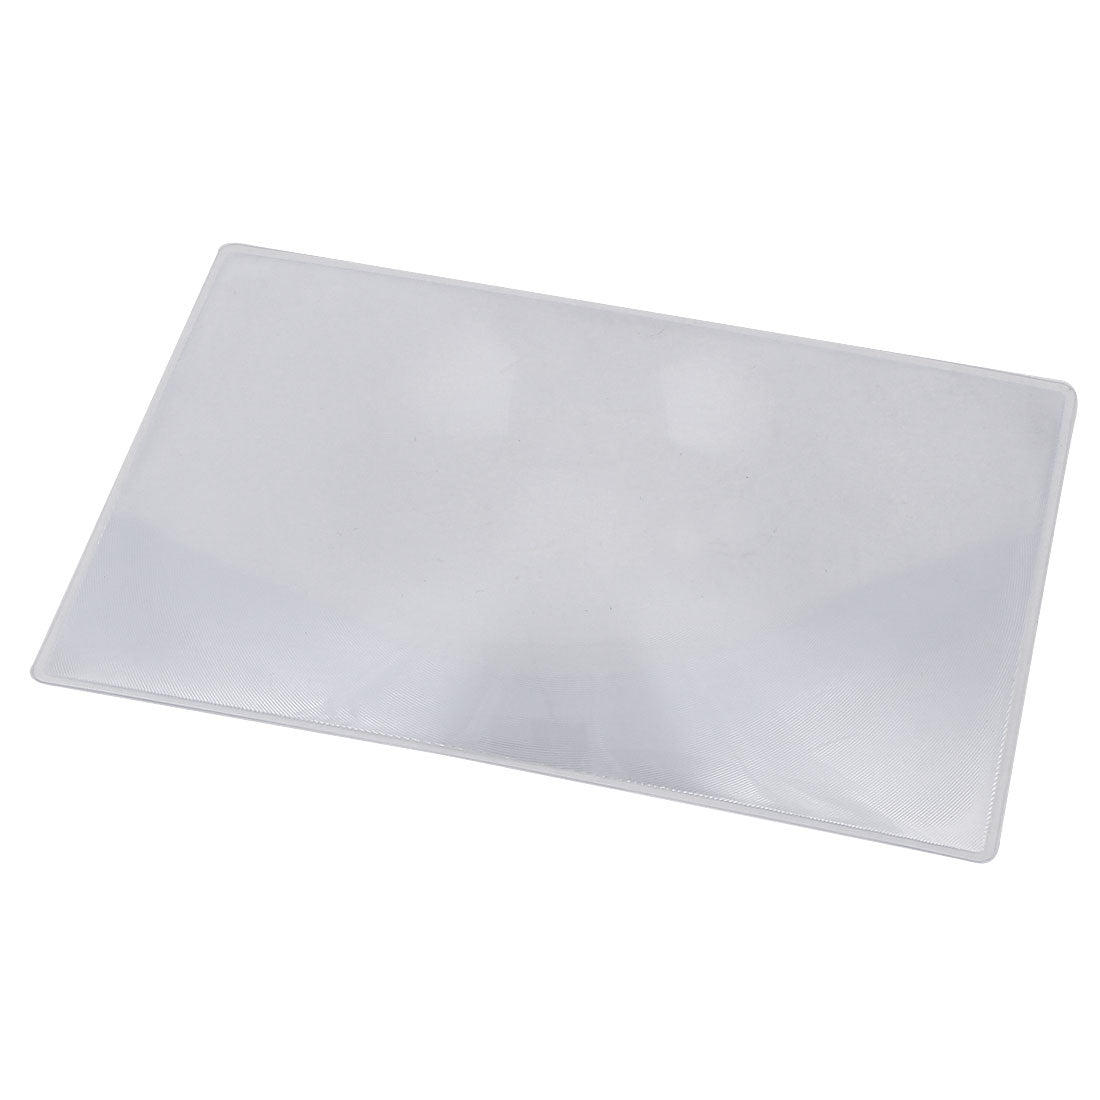 uxcell Uxcell Magnifier Lens Page 3x Magnifying Sheet 180mmx120mmx0.5mm